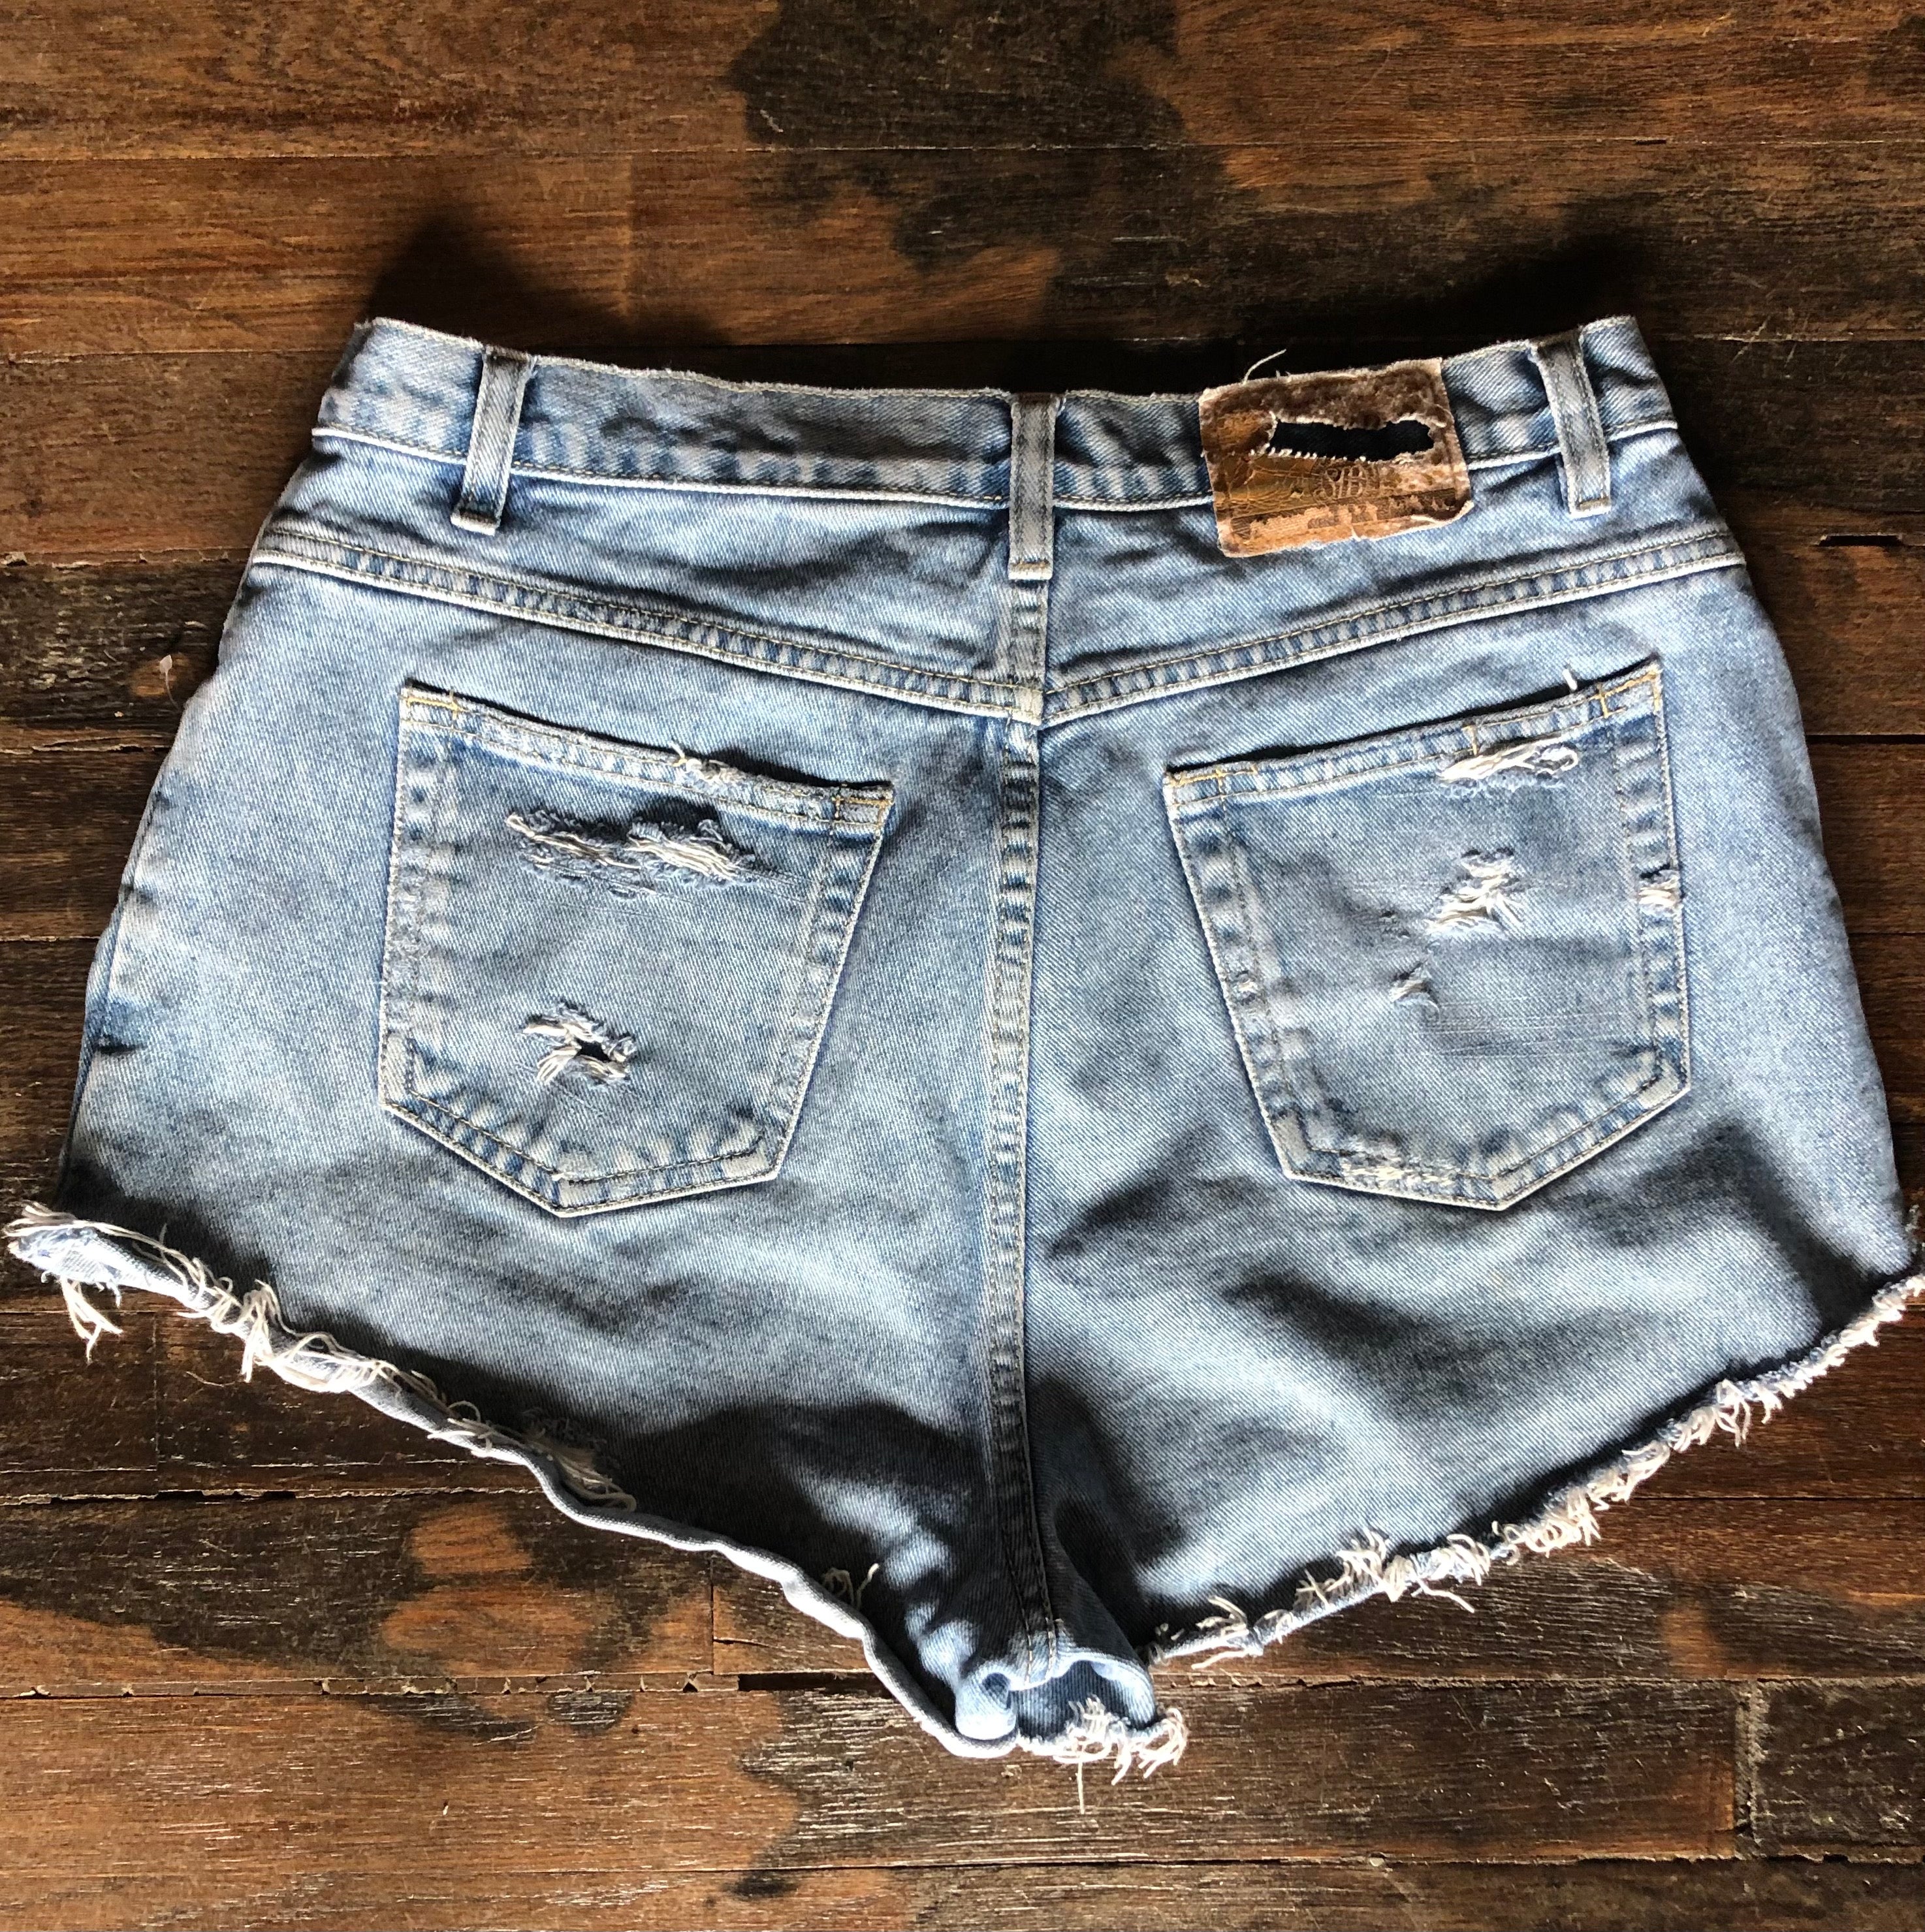 Old Navy Men's Slim Ripped Cut-Off Jean Shorts